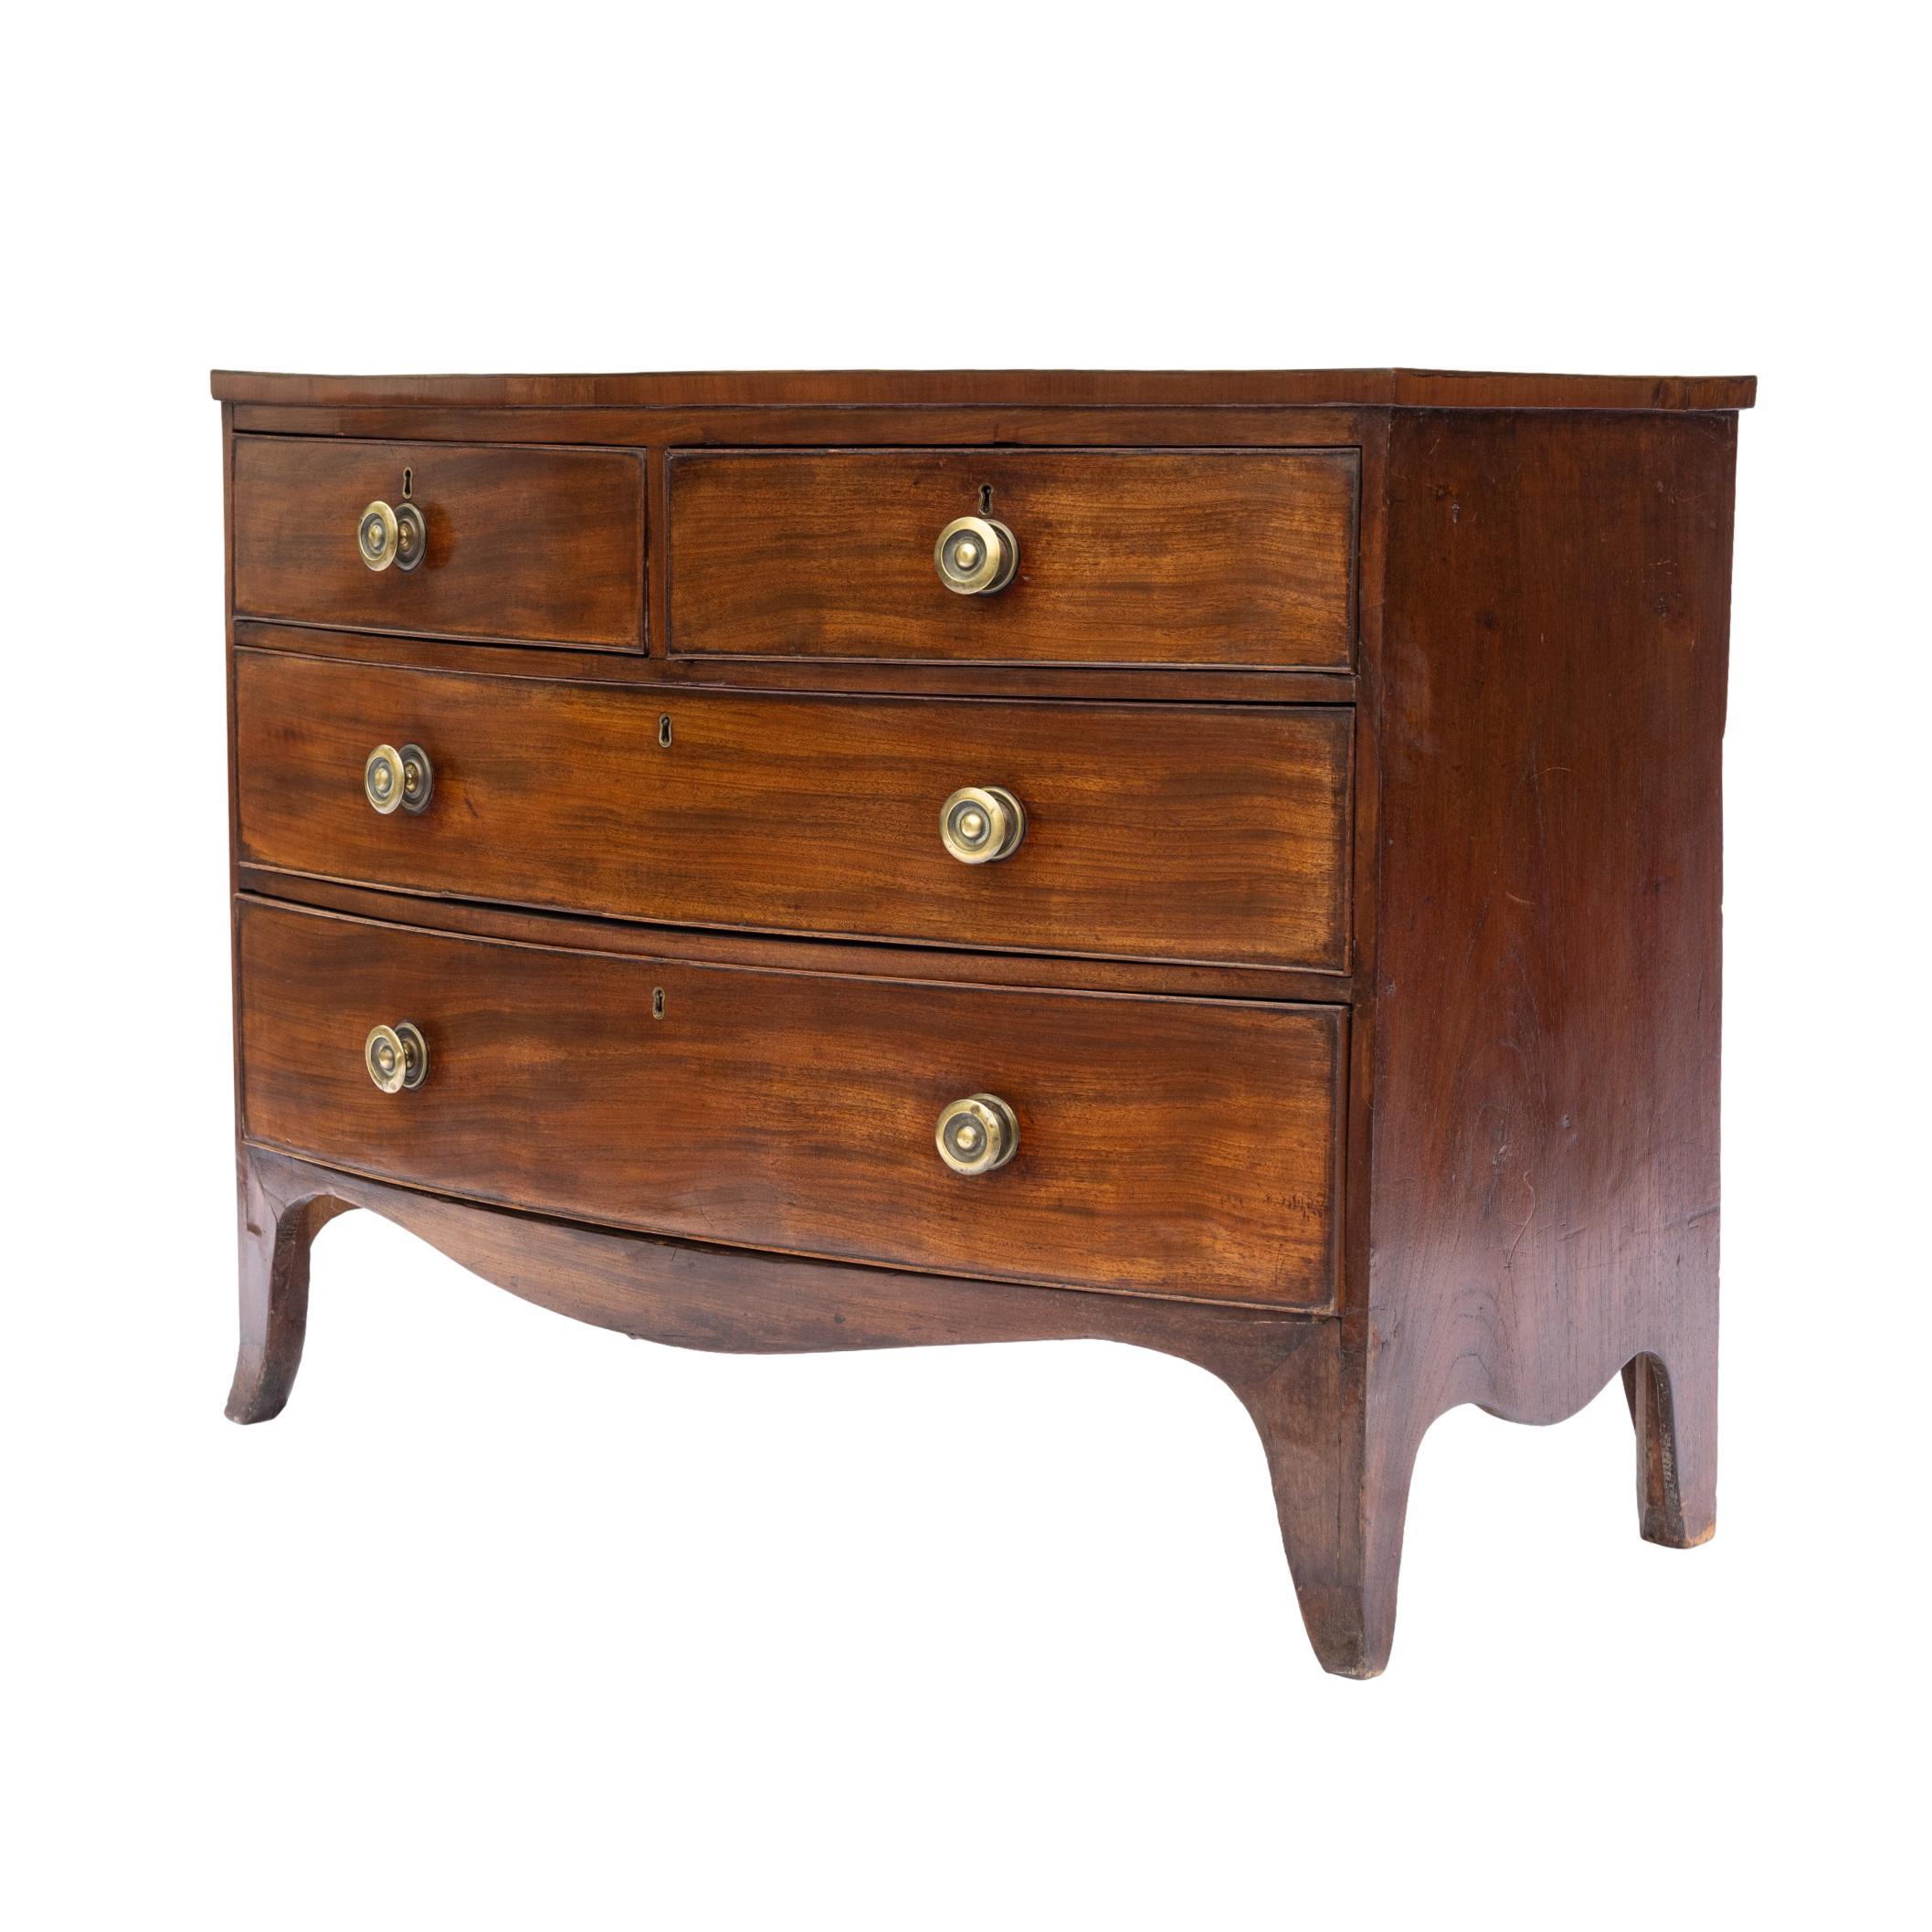 George III Georgian Mahogany Bow-Front Chest of Drawers with Satinwood Inlay, ca. 1820